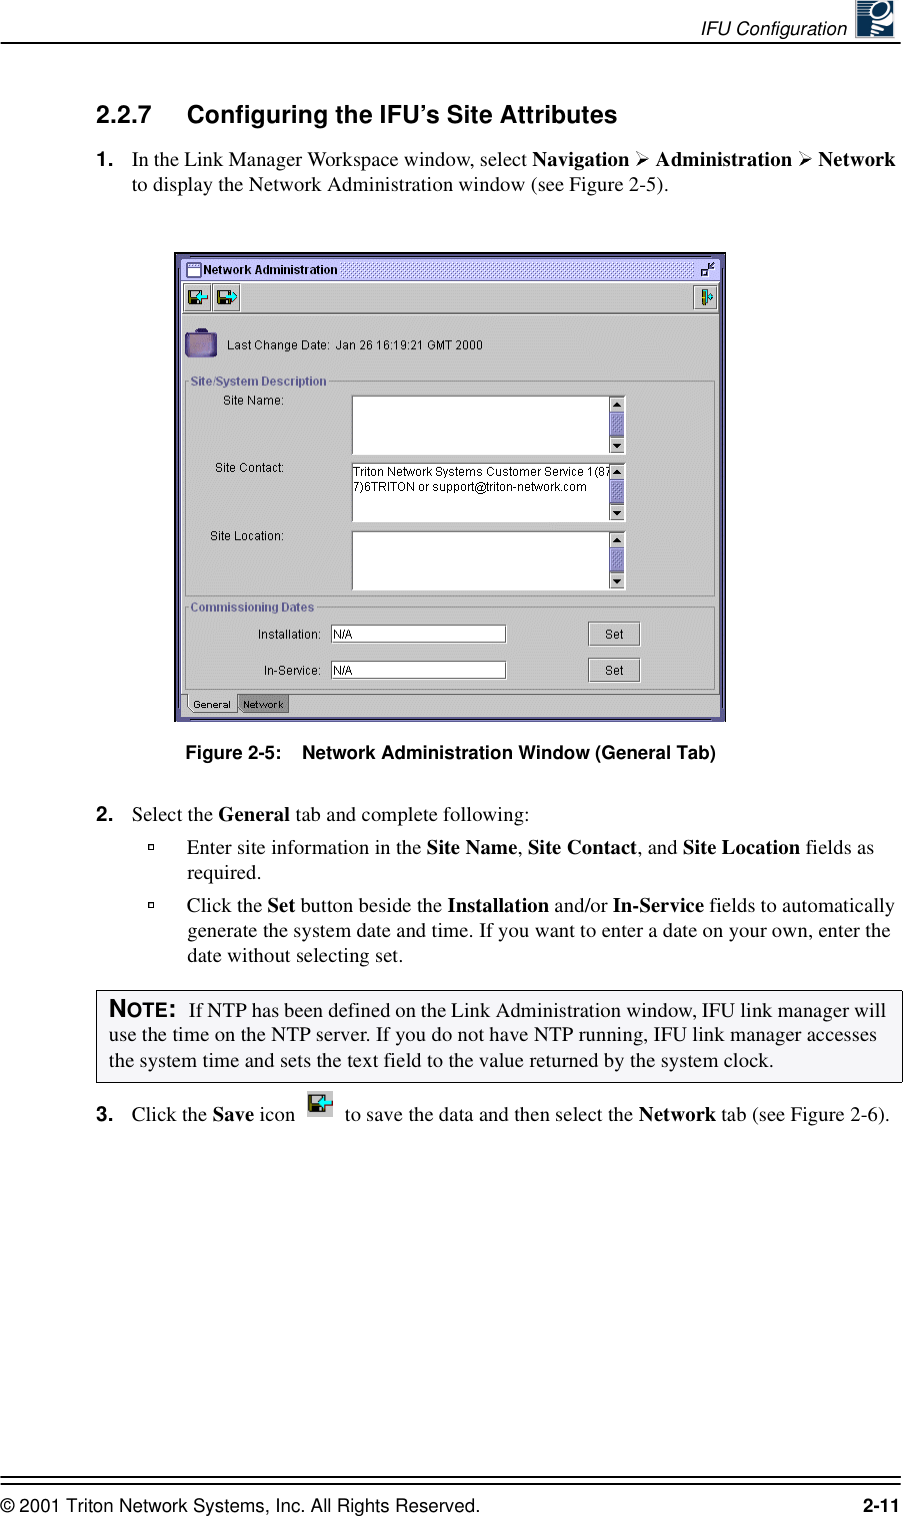 IFU Configuration © 2001 Triton Network Systems, Inc. All Rights Reserved. 2-112.2.7 Configuring the IFU’s Site Attributes1. In the Link Manager Workspace window, select Navigation   Administration   Network to display the Network Administration window (see Figure 2-5). Figure 2-5:    Network Administration Window (General Tab)2. Select the General tab and complete following:Enter site information in the Site Name, Site Contact, and Site Location fields as required.Click the Set button beside the Installation and/or In-Service fields to automatically generate the system date and time. If you want to enter a date on your own, enter the date without selecting set. 3. Click the Save icon   to save the data and then select the Network tab (see Figure 2-6).NOTE:  If NTP has been defined on the Link Administration window, IFU link manager will use the time on the NTP server. If you do not have NTP running, IFU link manager accesses the system time and sets the text field to the value returned by the system clock.